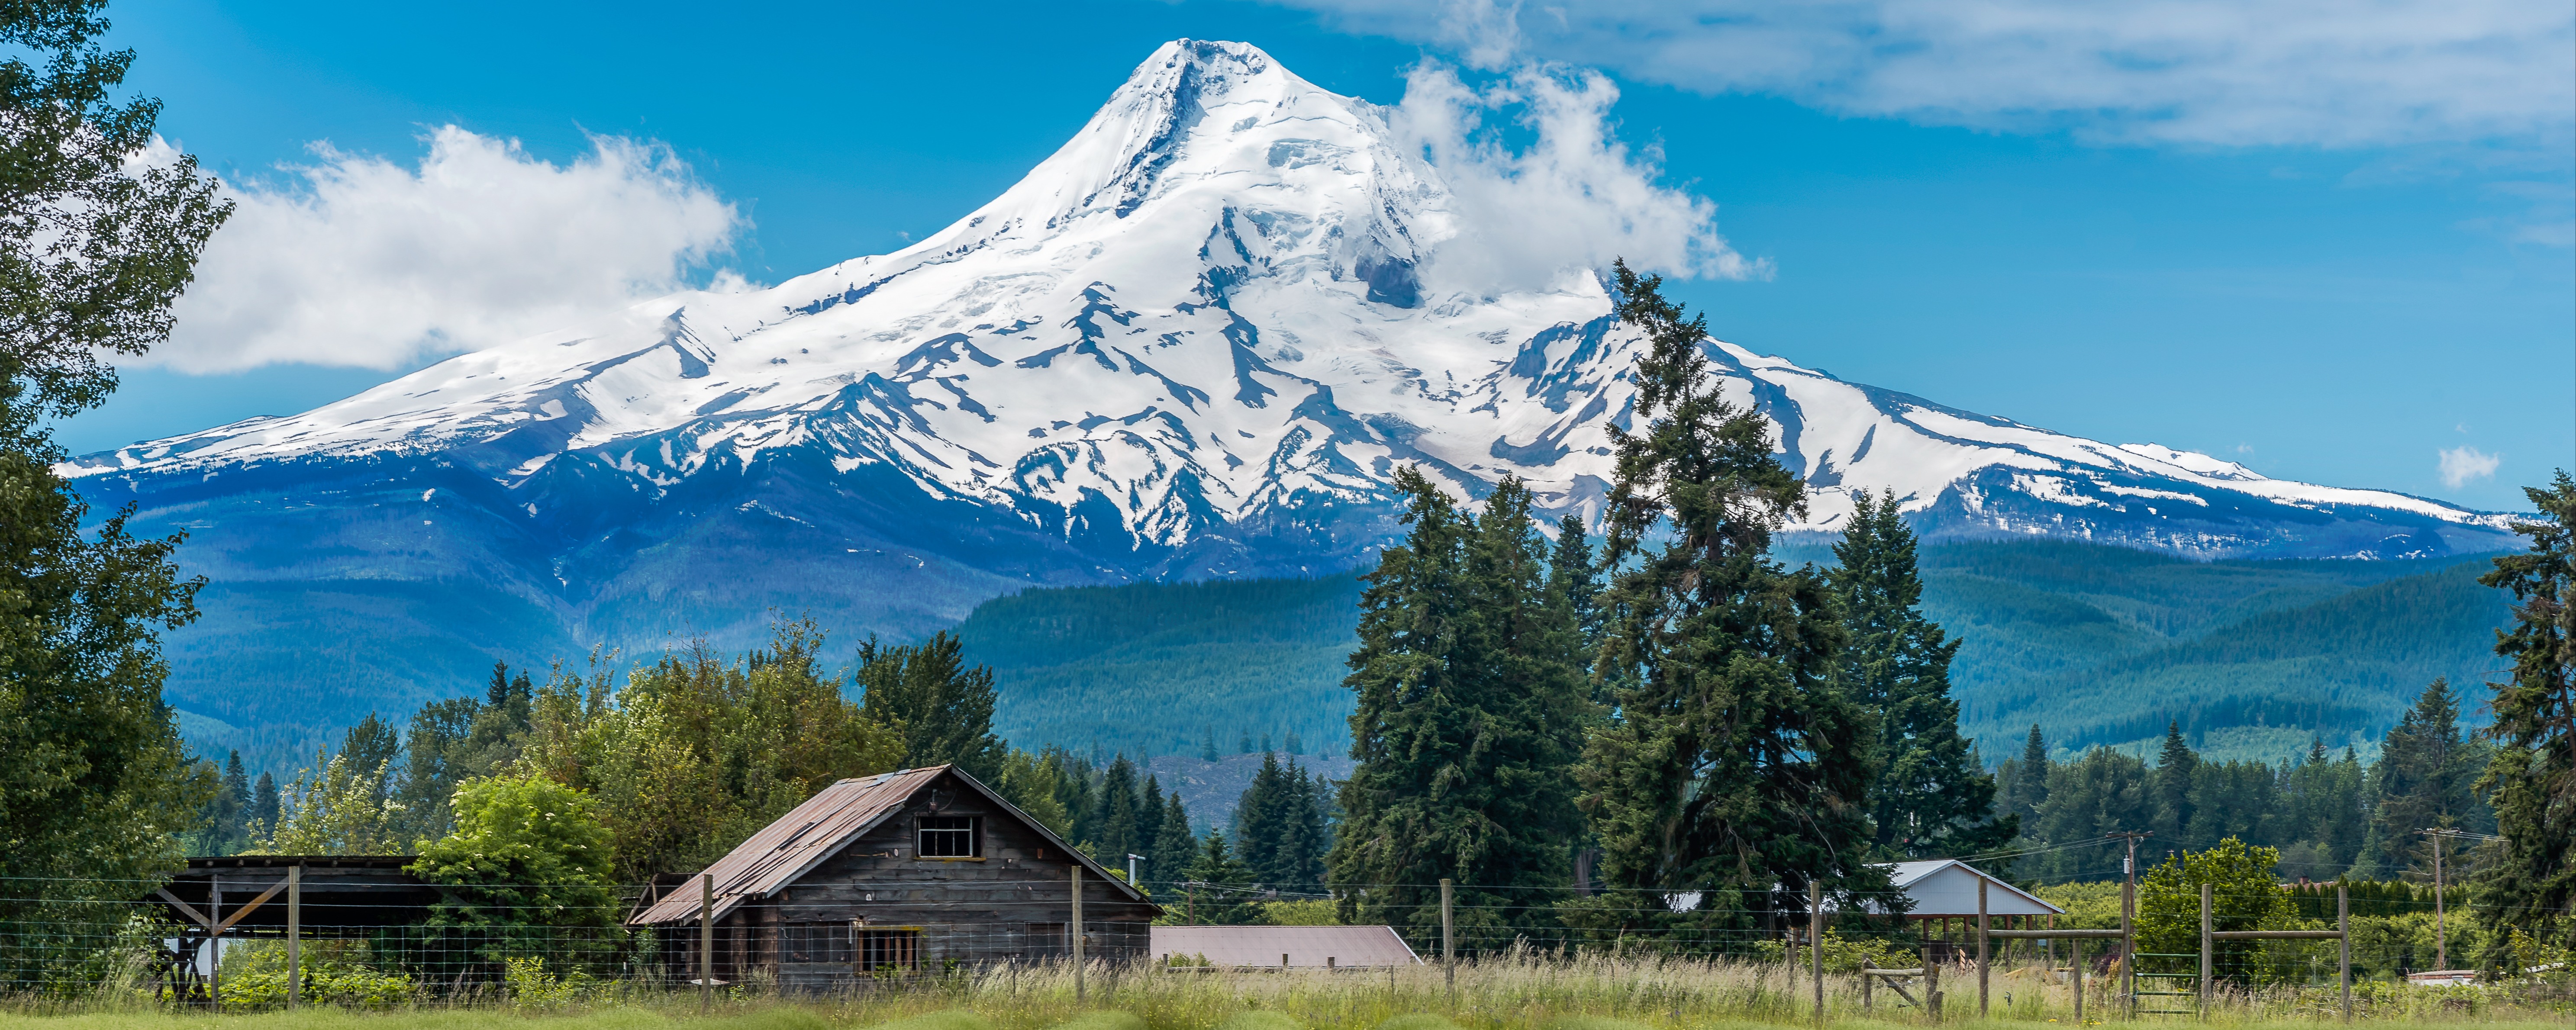 Mount Hood towering over lavender fields in the foreground. Photo: cbartell42, Shutterstock